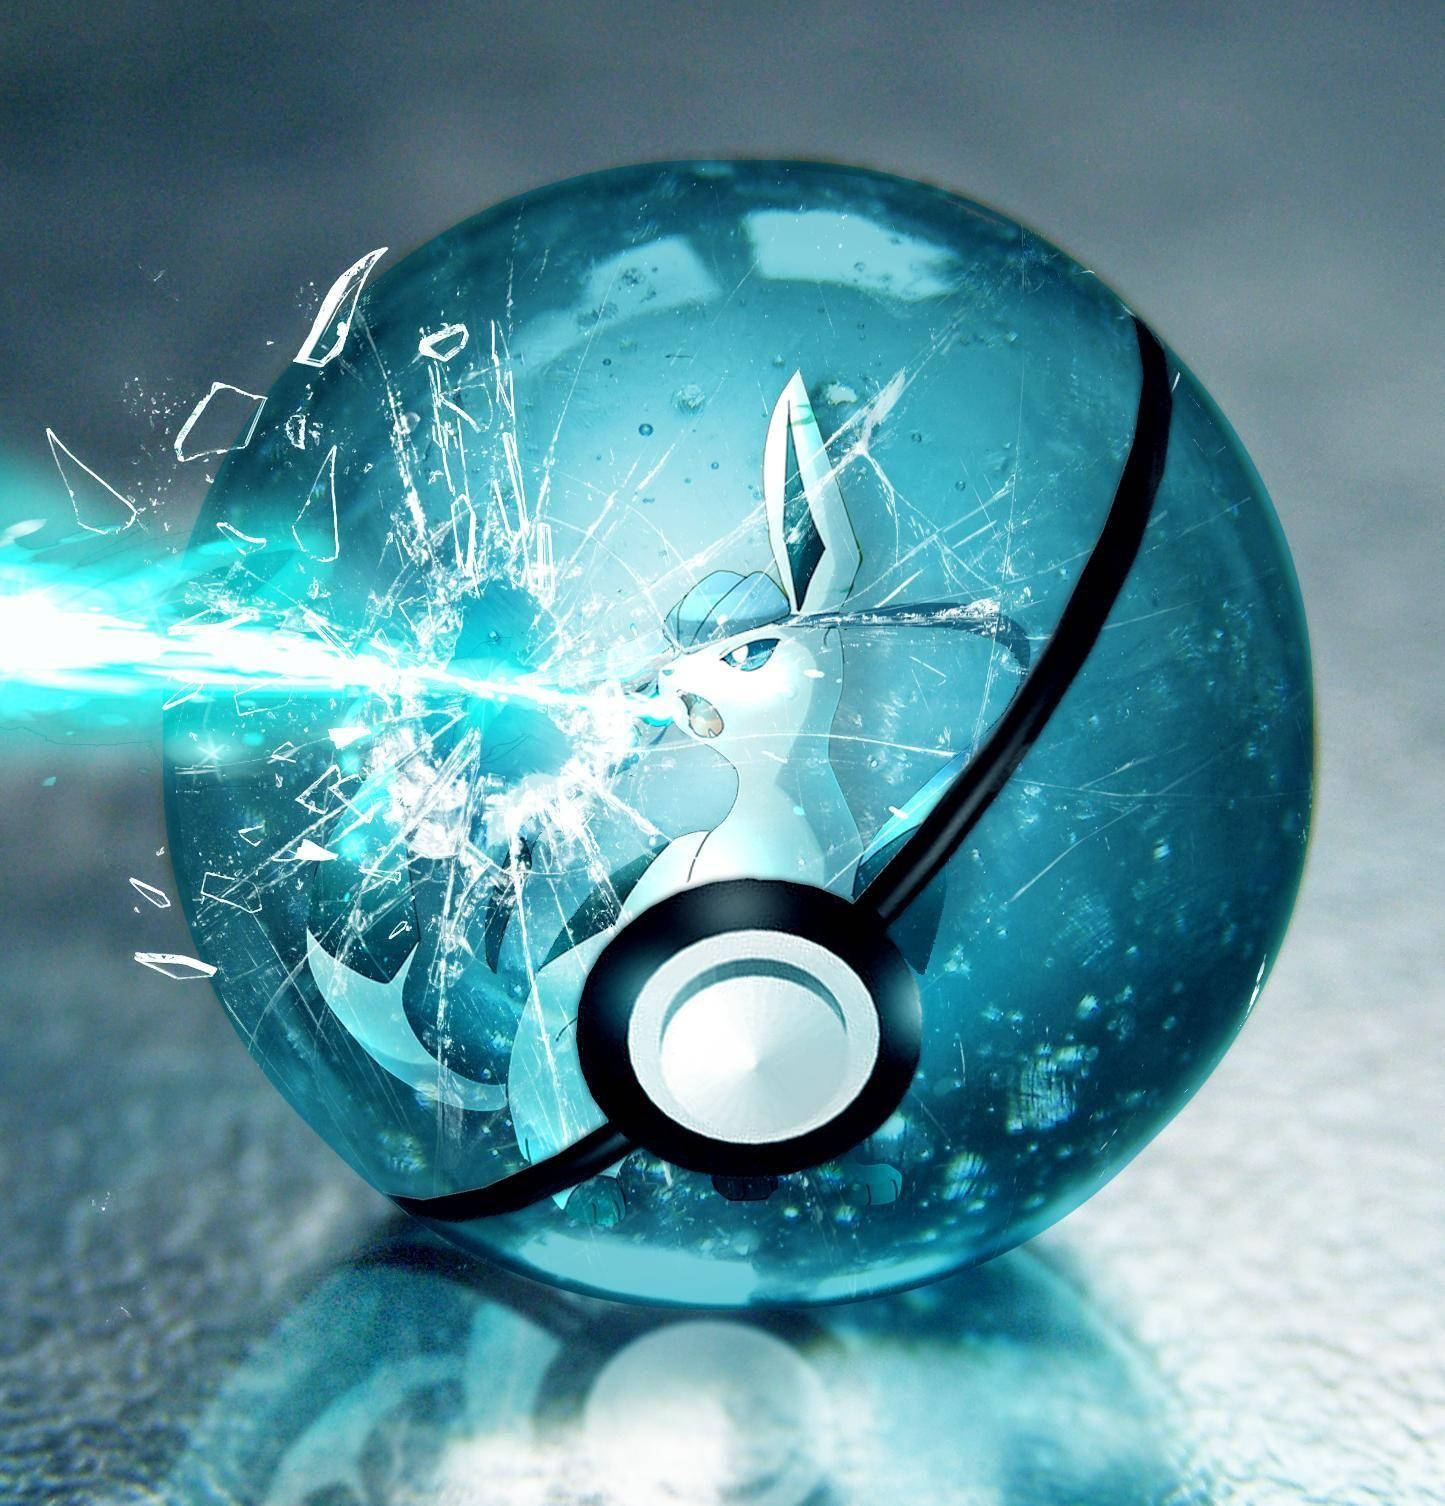 Glaceon Inside A Pokéball - Ready To Battle! Background